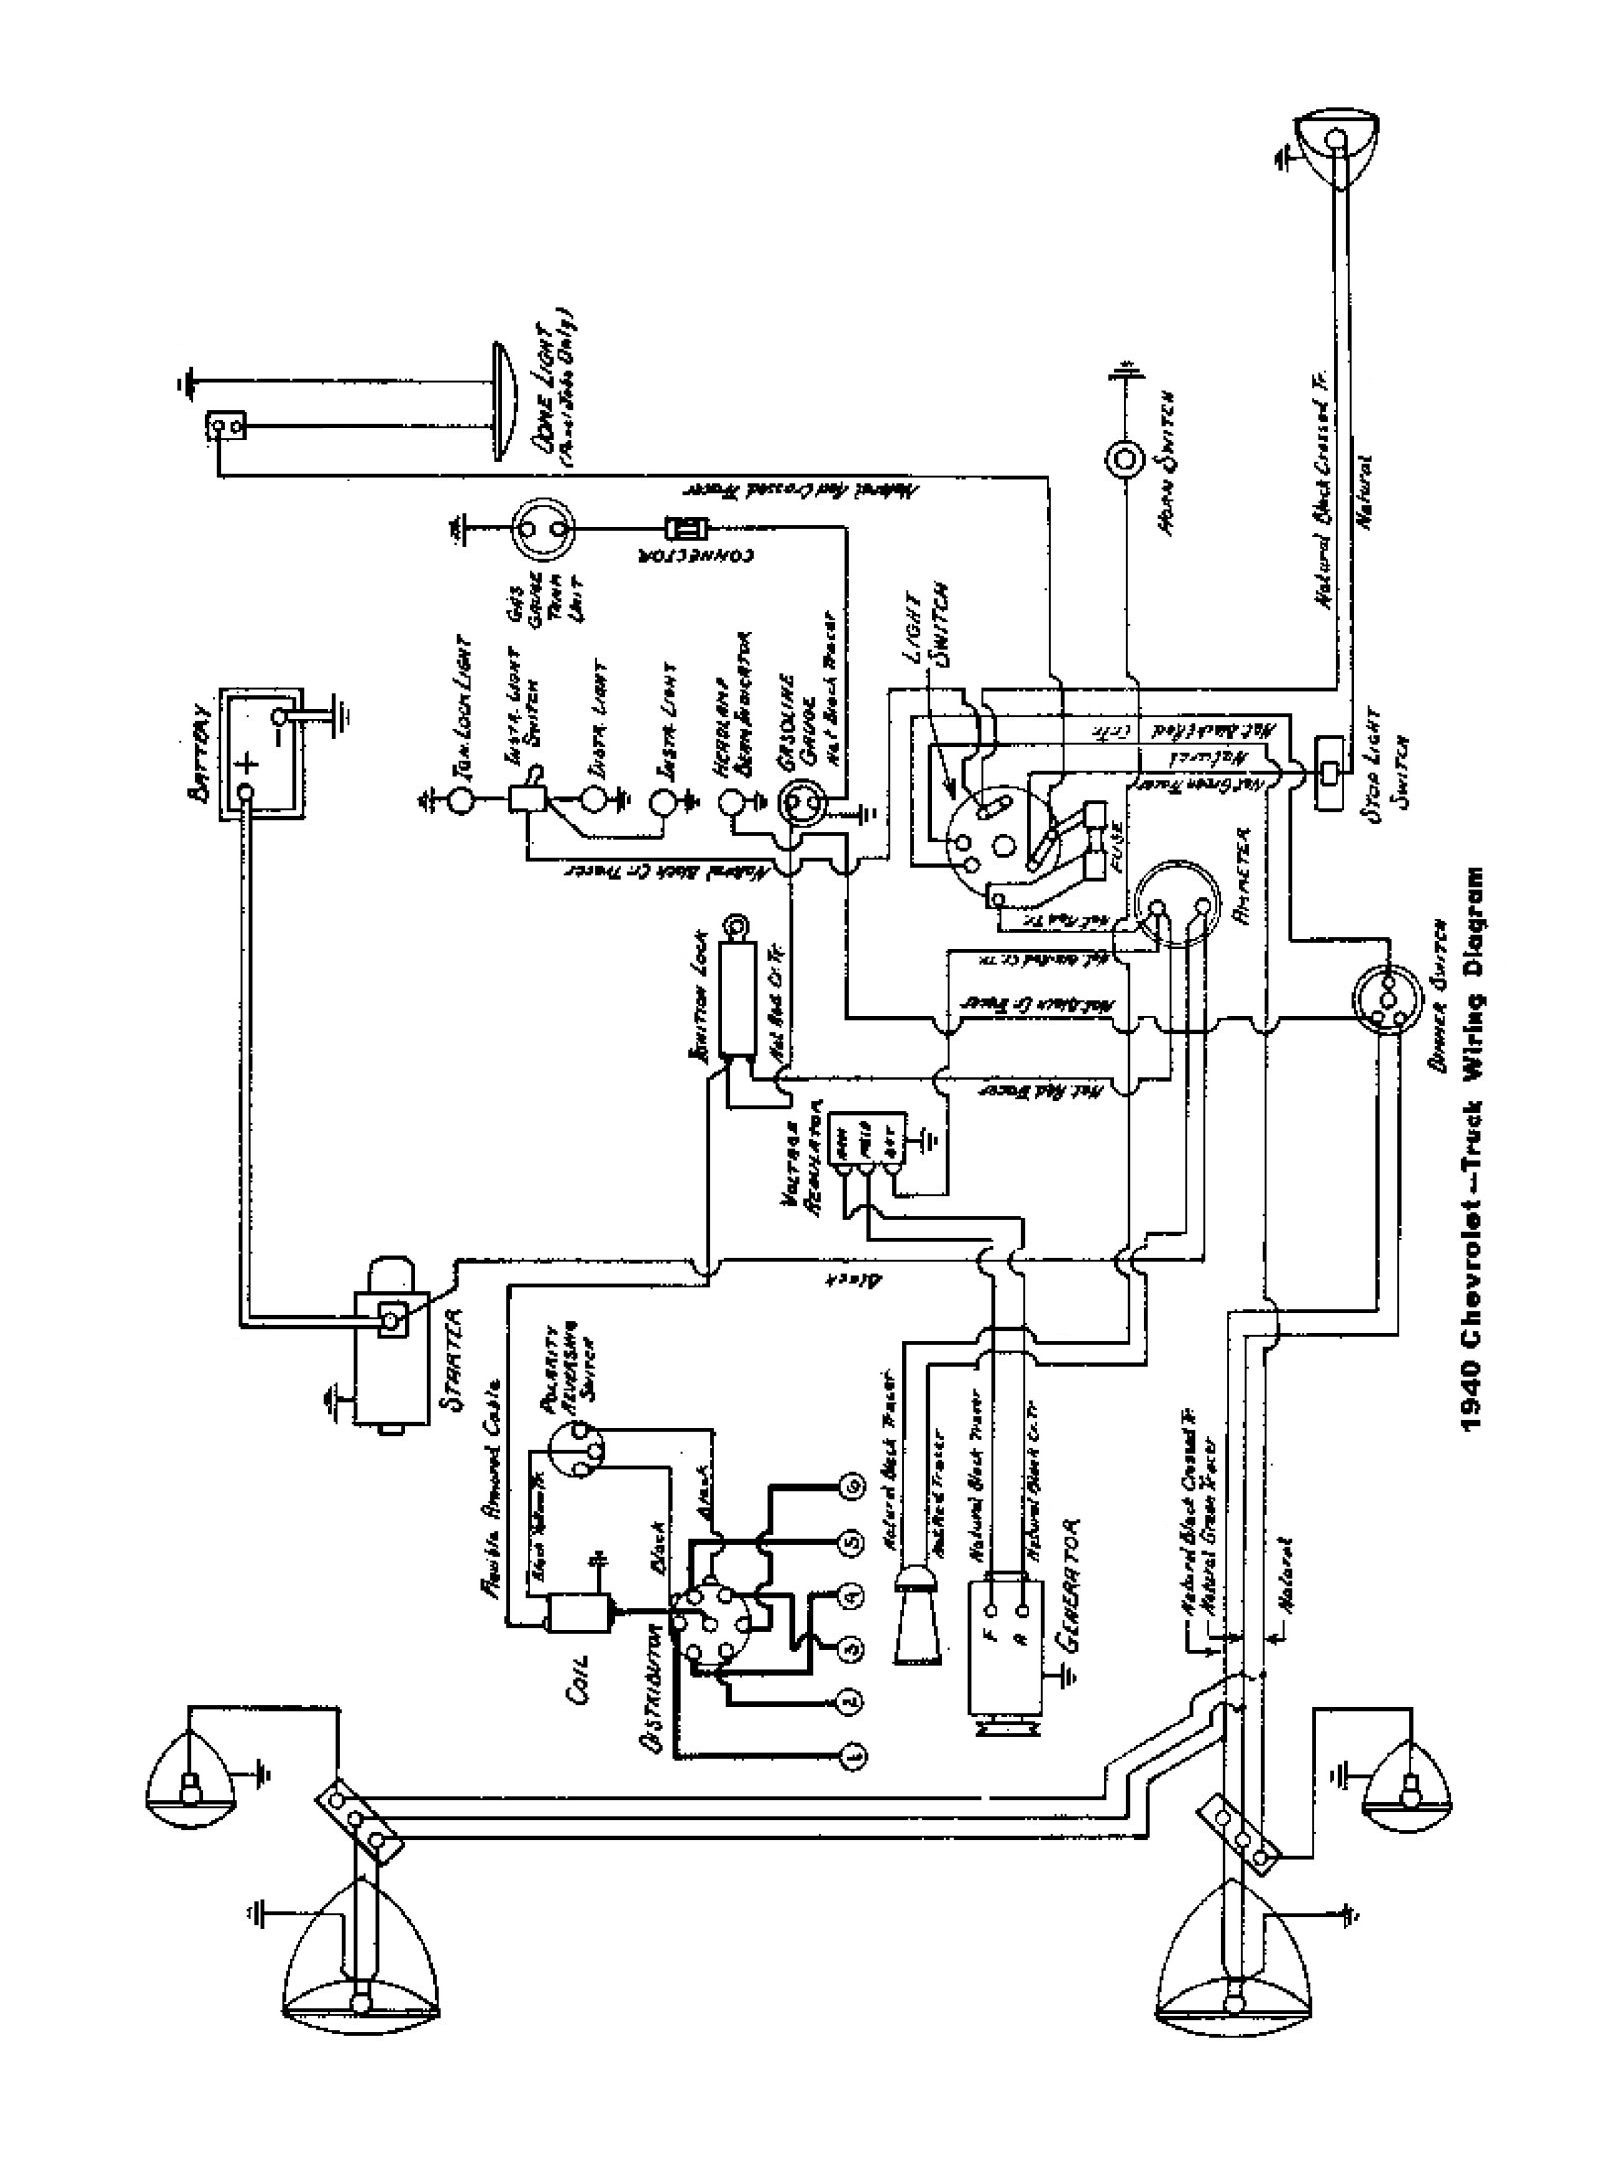 1981 Chevy Truck Wiring Diagram Chevy Wiring Diagrams